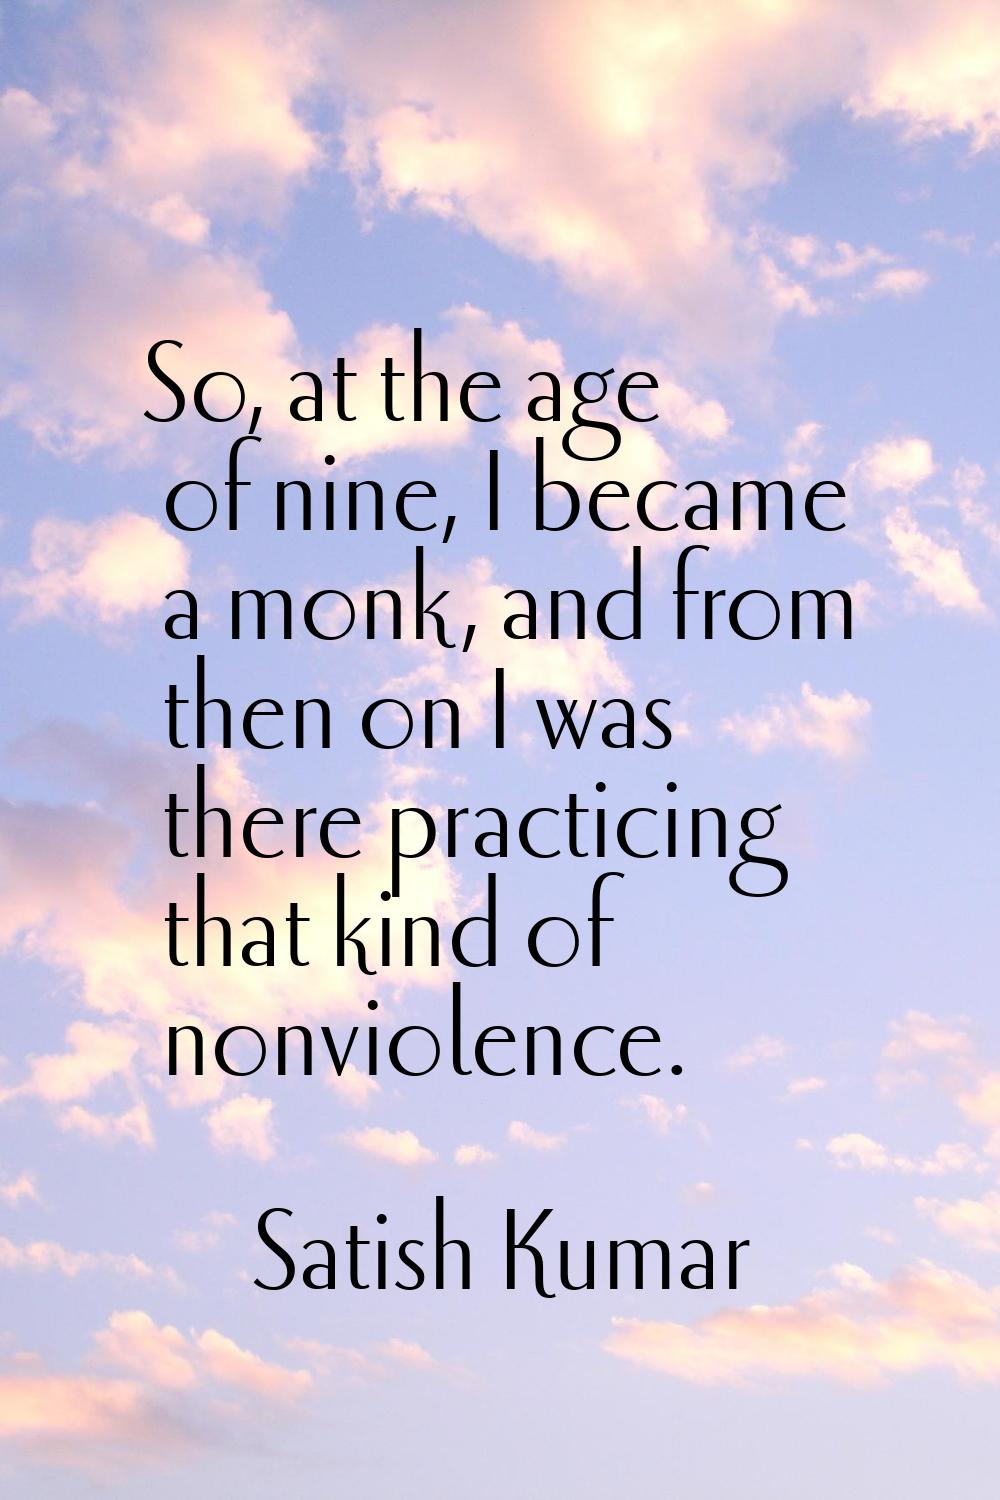 So, at the age of nine, I became a monk, and from then on I was there practicing that kind of nonvi